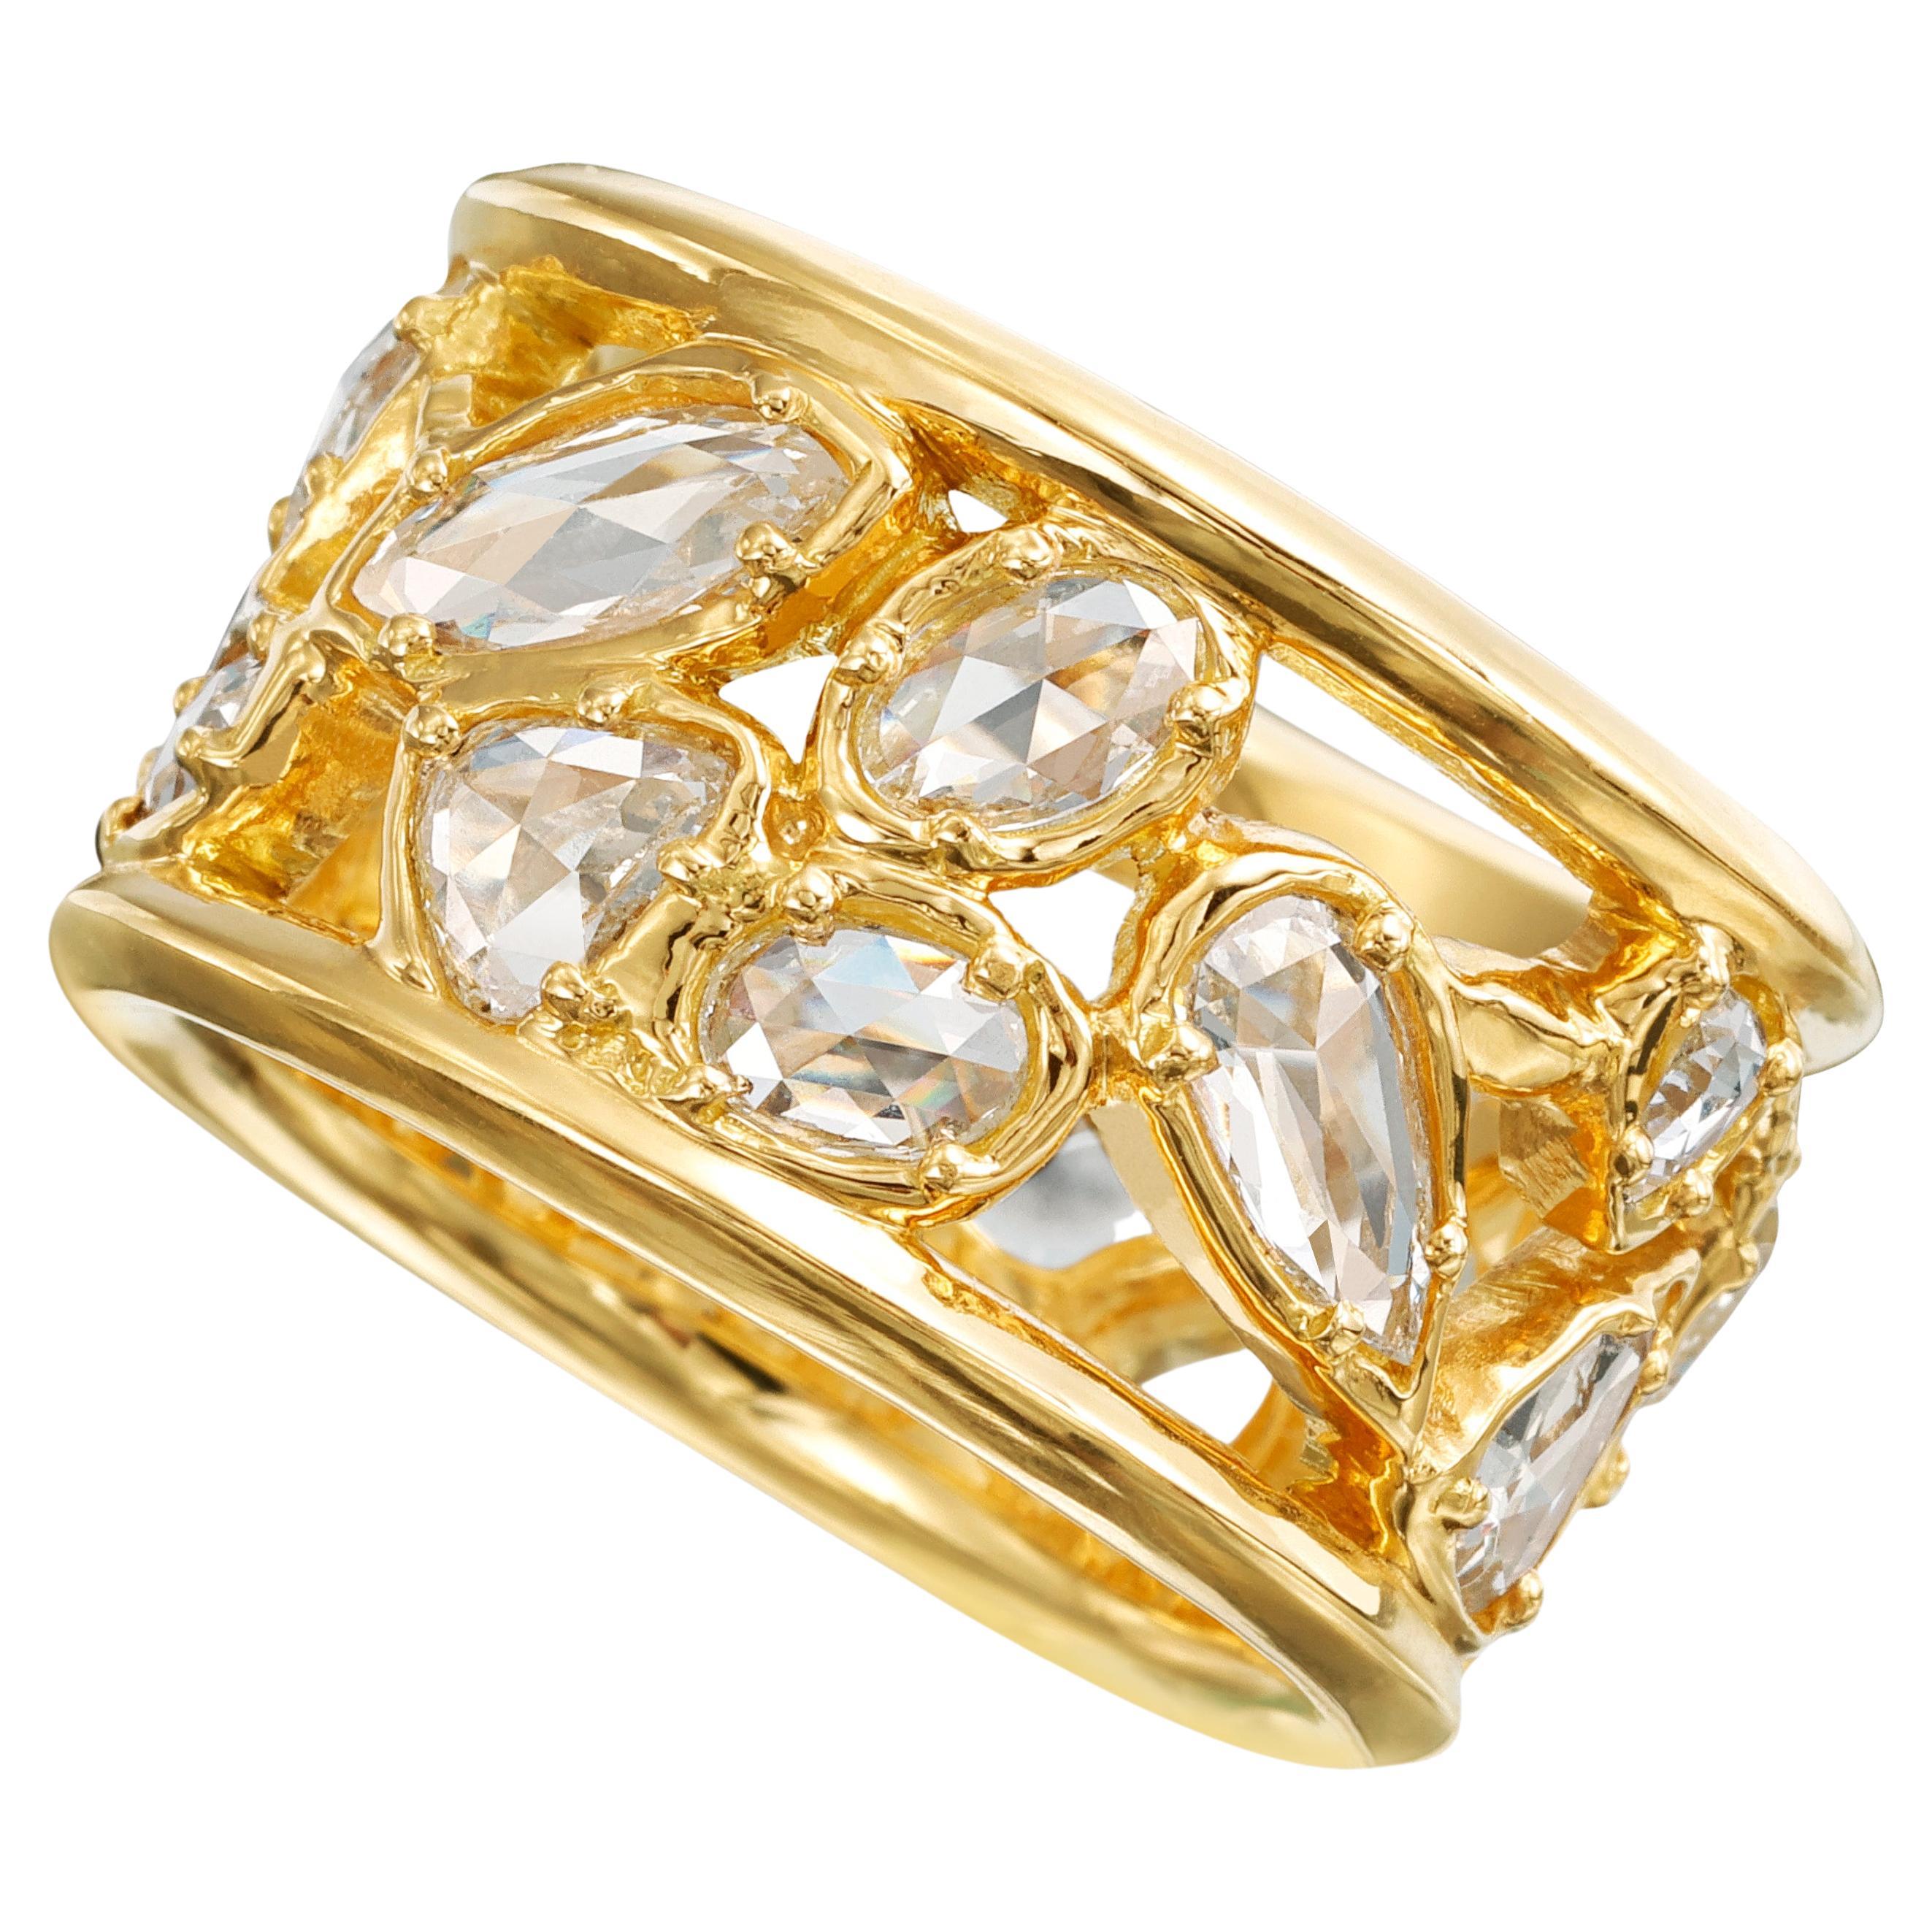 18kt Yellow Gold OOAK Open-Work Wide Band Ring with White Rose Cut Diamonds